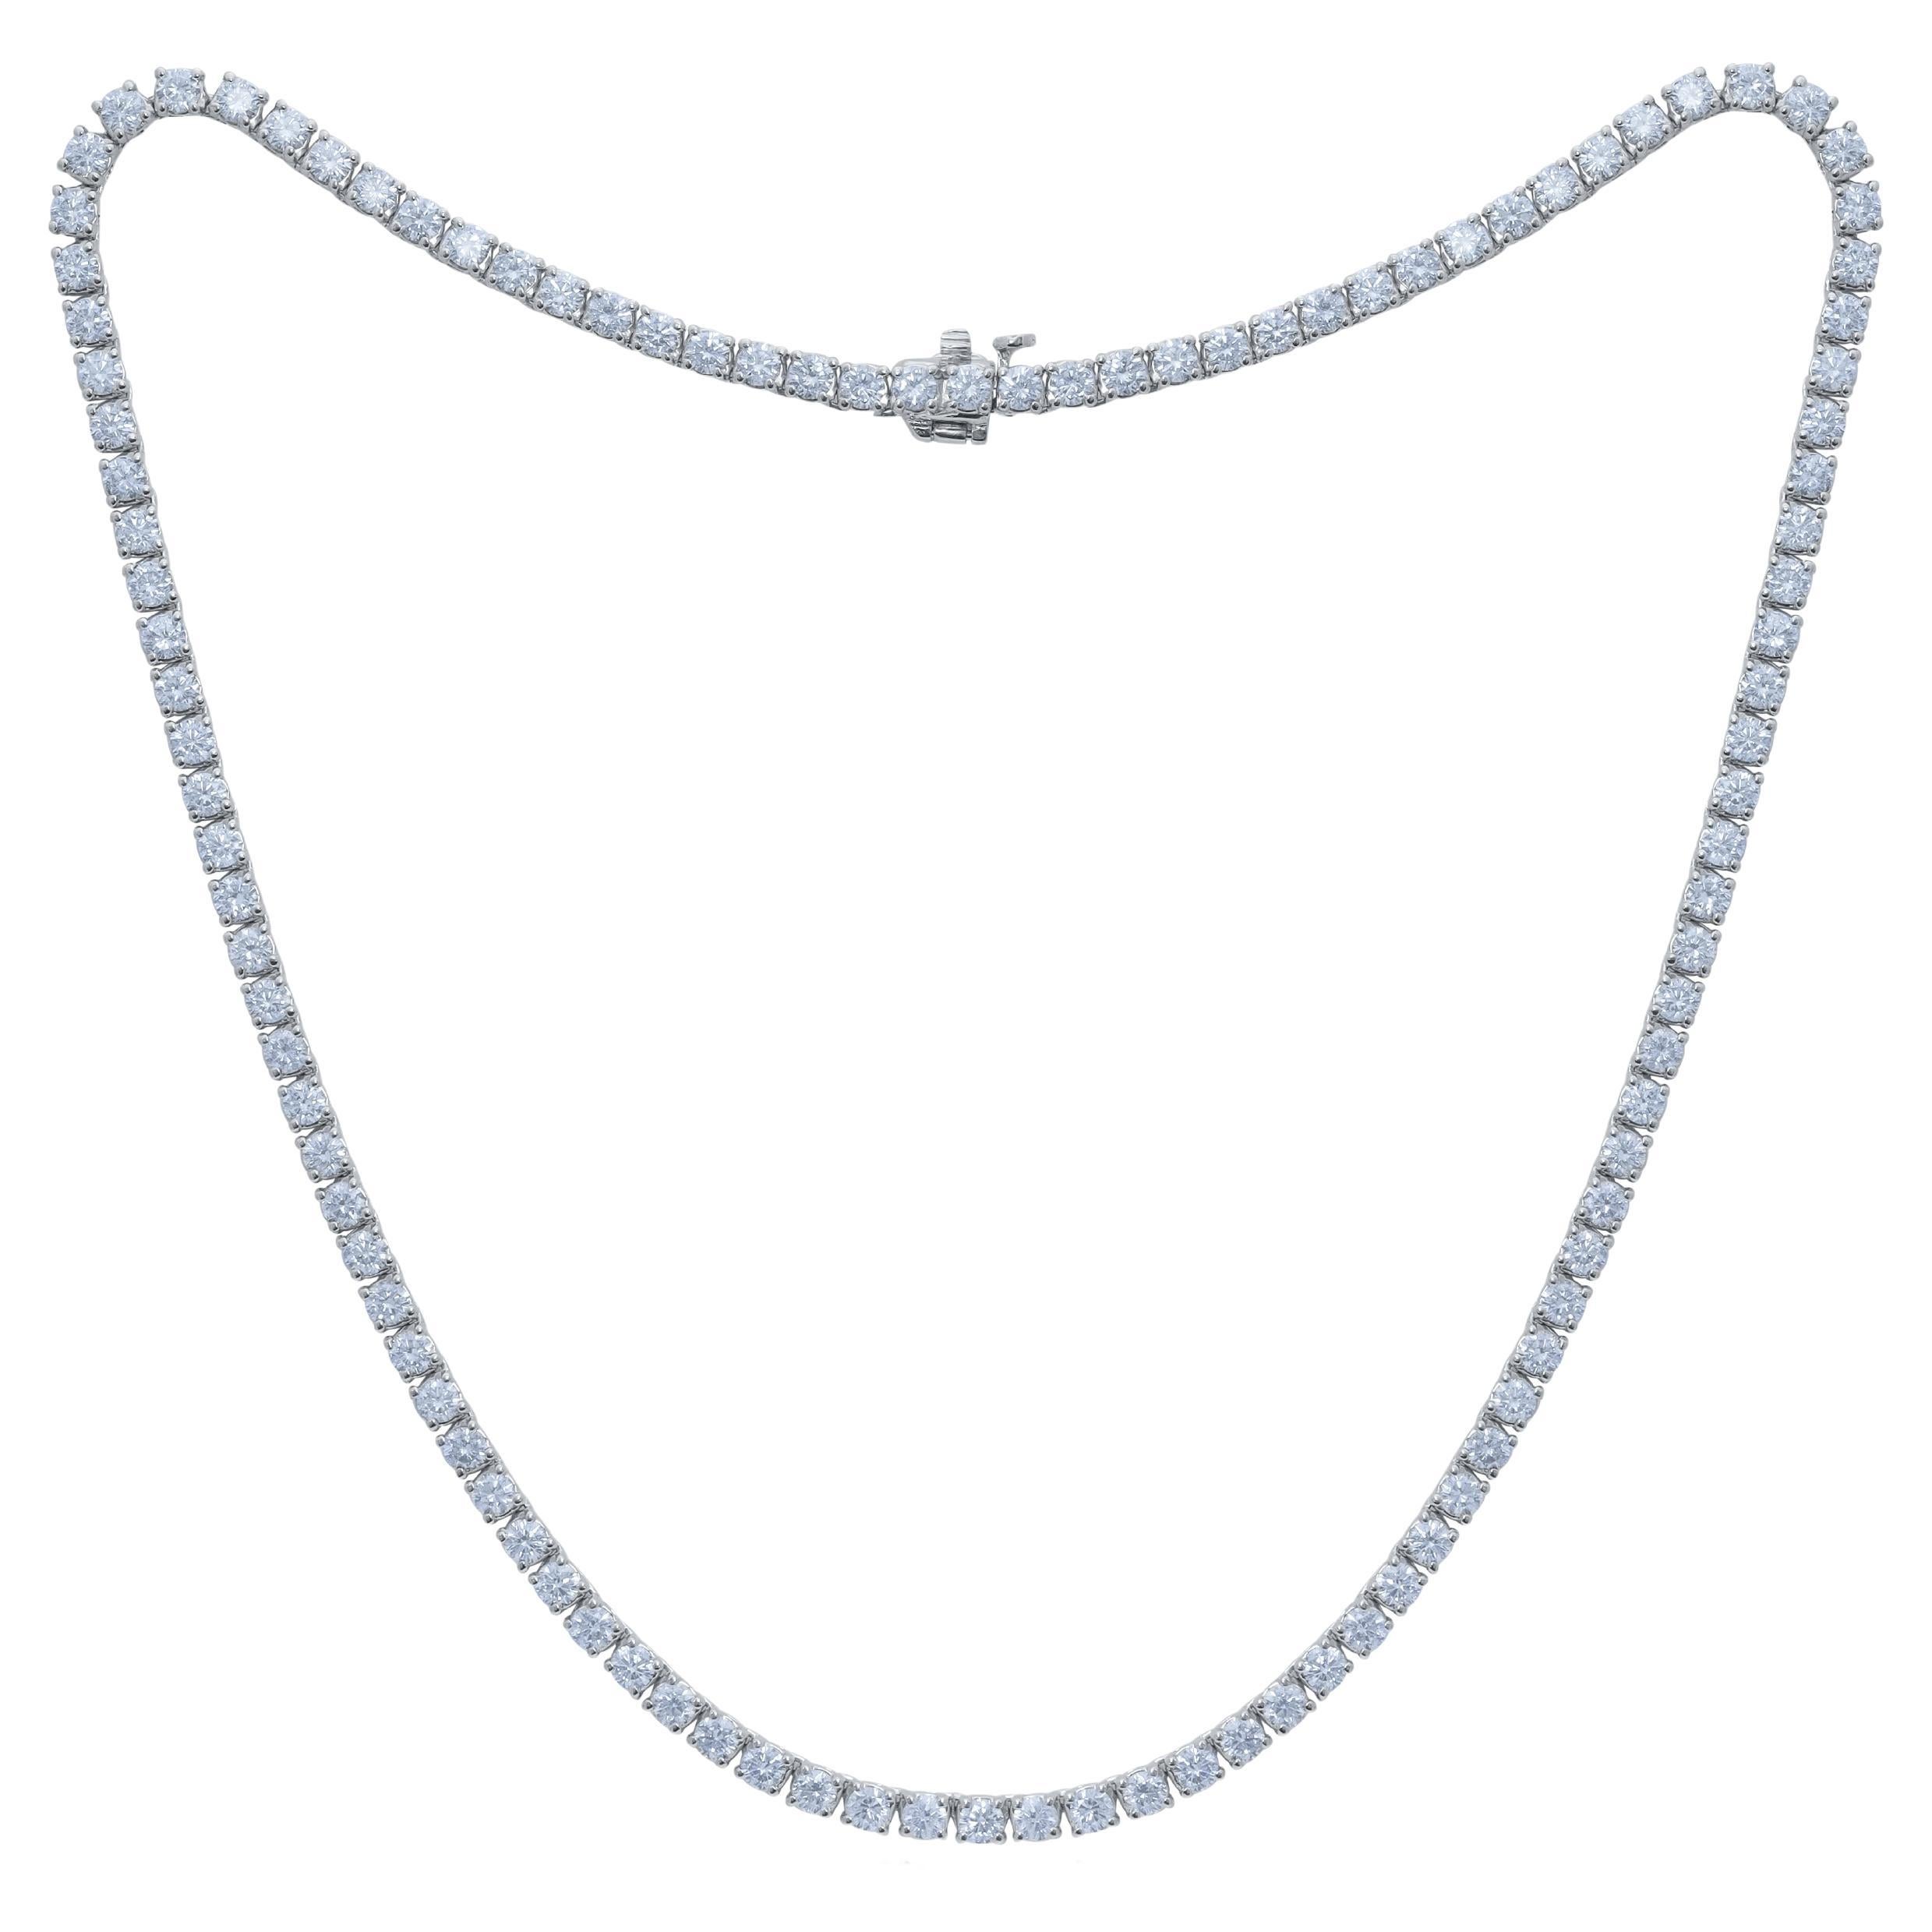 Diana M. 14 kt white gold, 18" 4 prong diamond tennis necklace featuring 10.50 